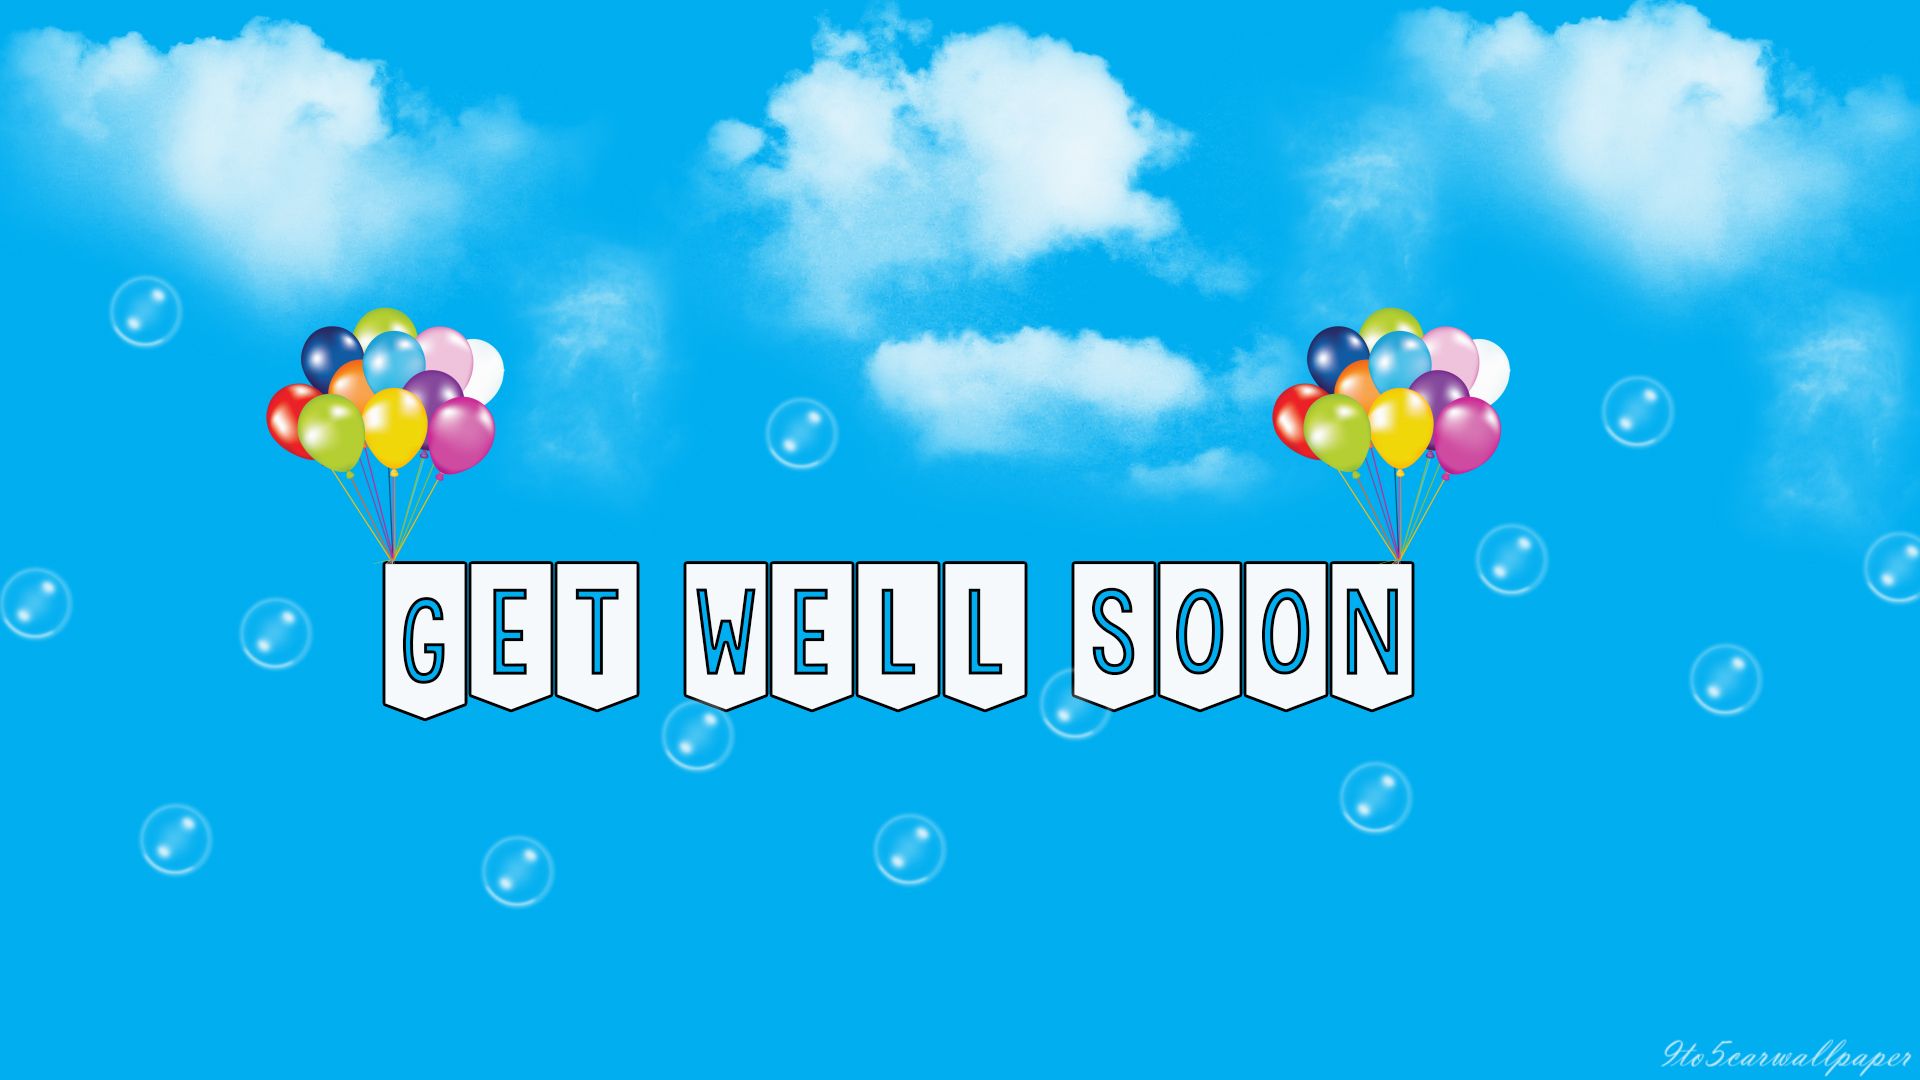 Get Well Soon Inspirational Quotes-Wishes-Pics